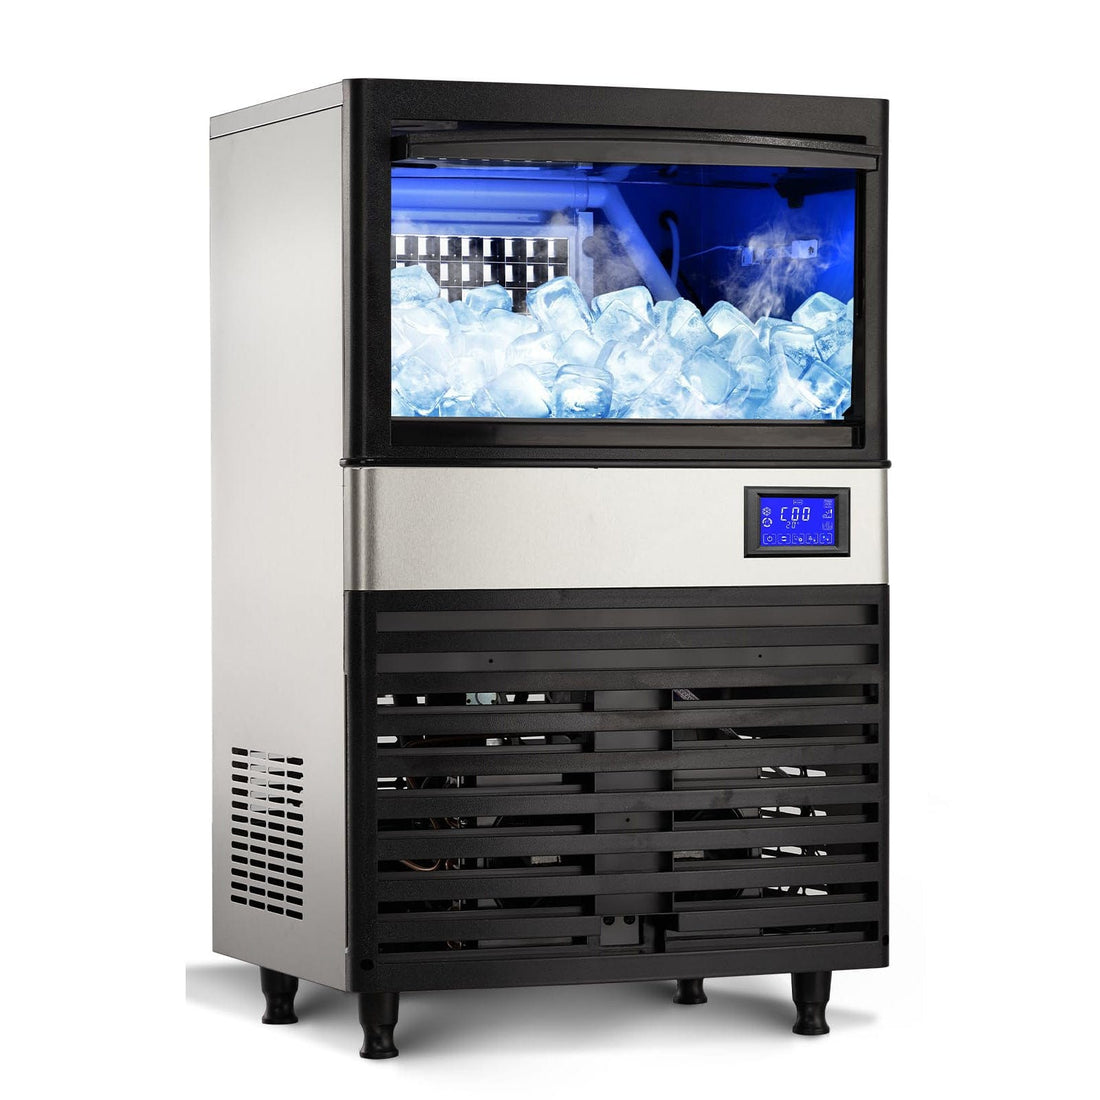 GARVEE 110lbs/24h, Commercial Ice Maker, 27lbs Bin, Stainless Steel, Freestanding with LCD Panel Auto Operation for Home/Restaurants/Bars/Cafe/Hotels